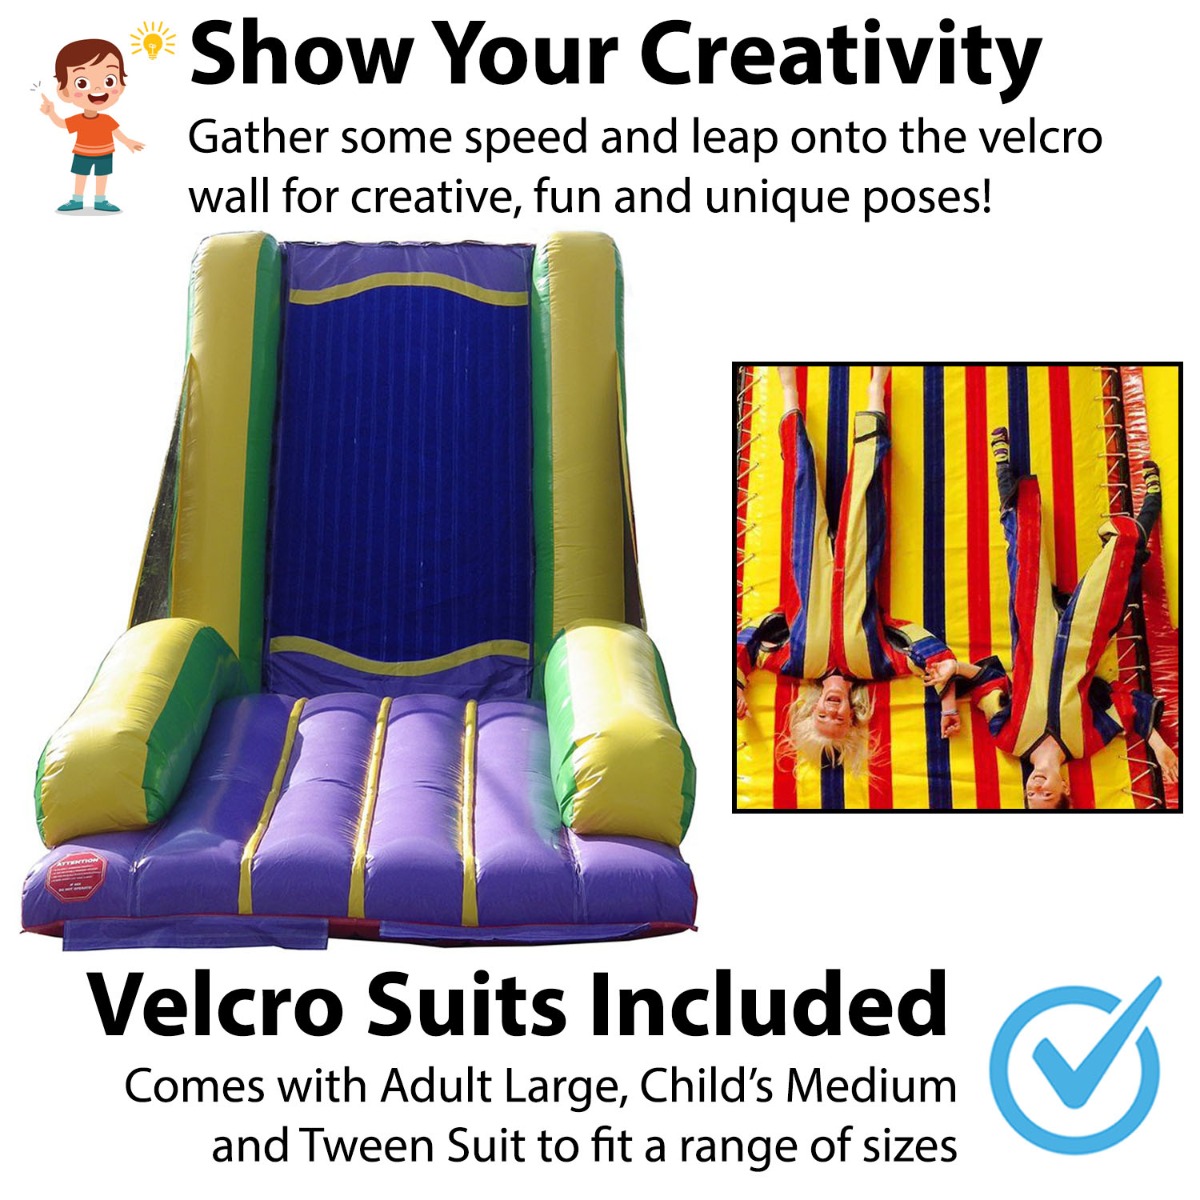 TentandTable Commercial Interactive Inflatable Velcro Wall with Sticky Suits